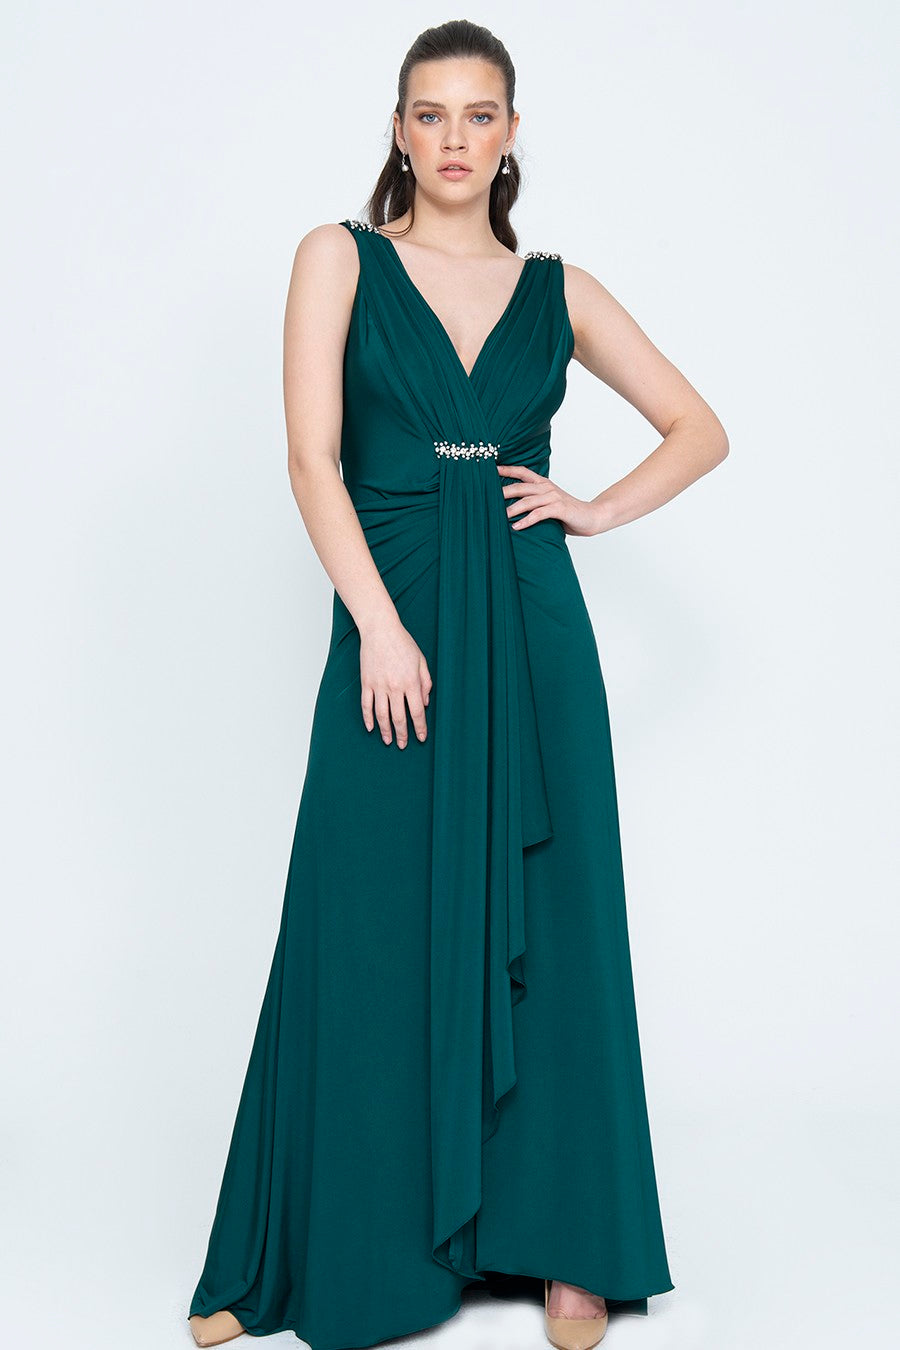 Lily - Mystic Evenings | Evening and Prom Dresses